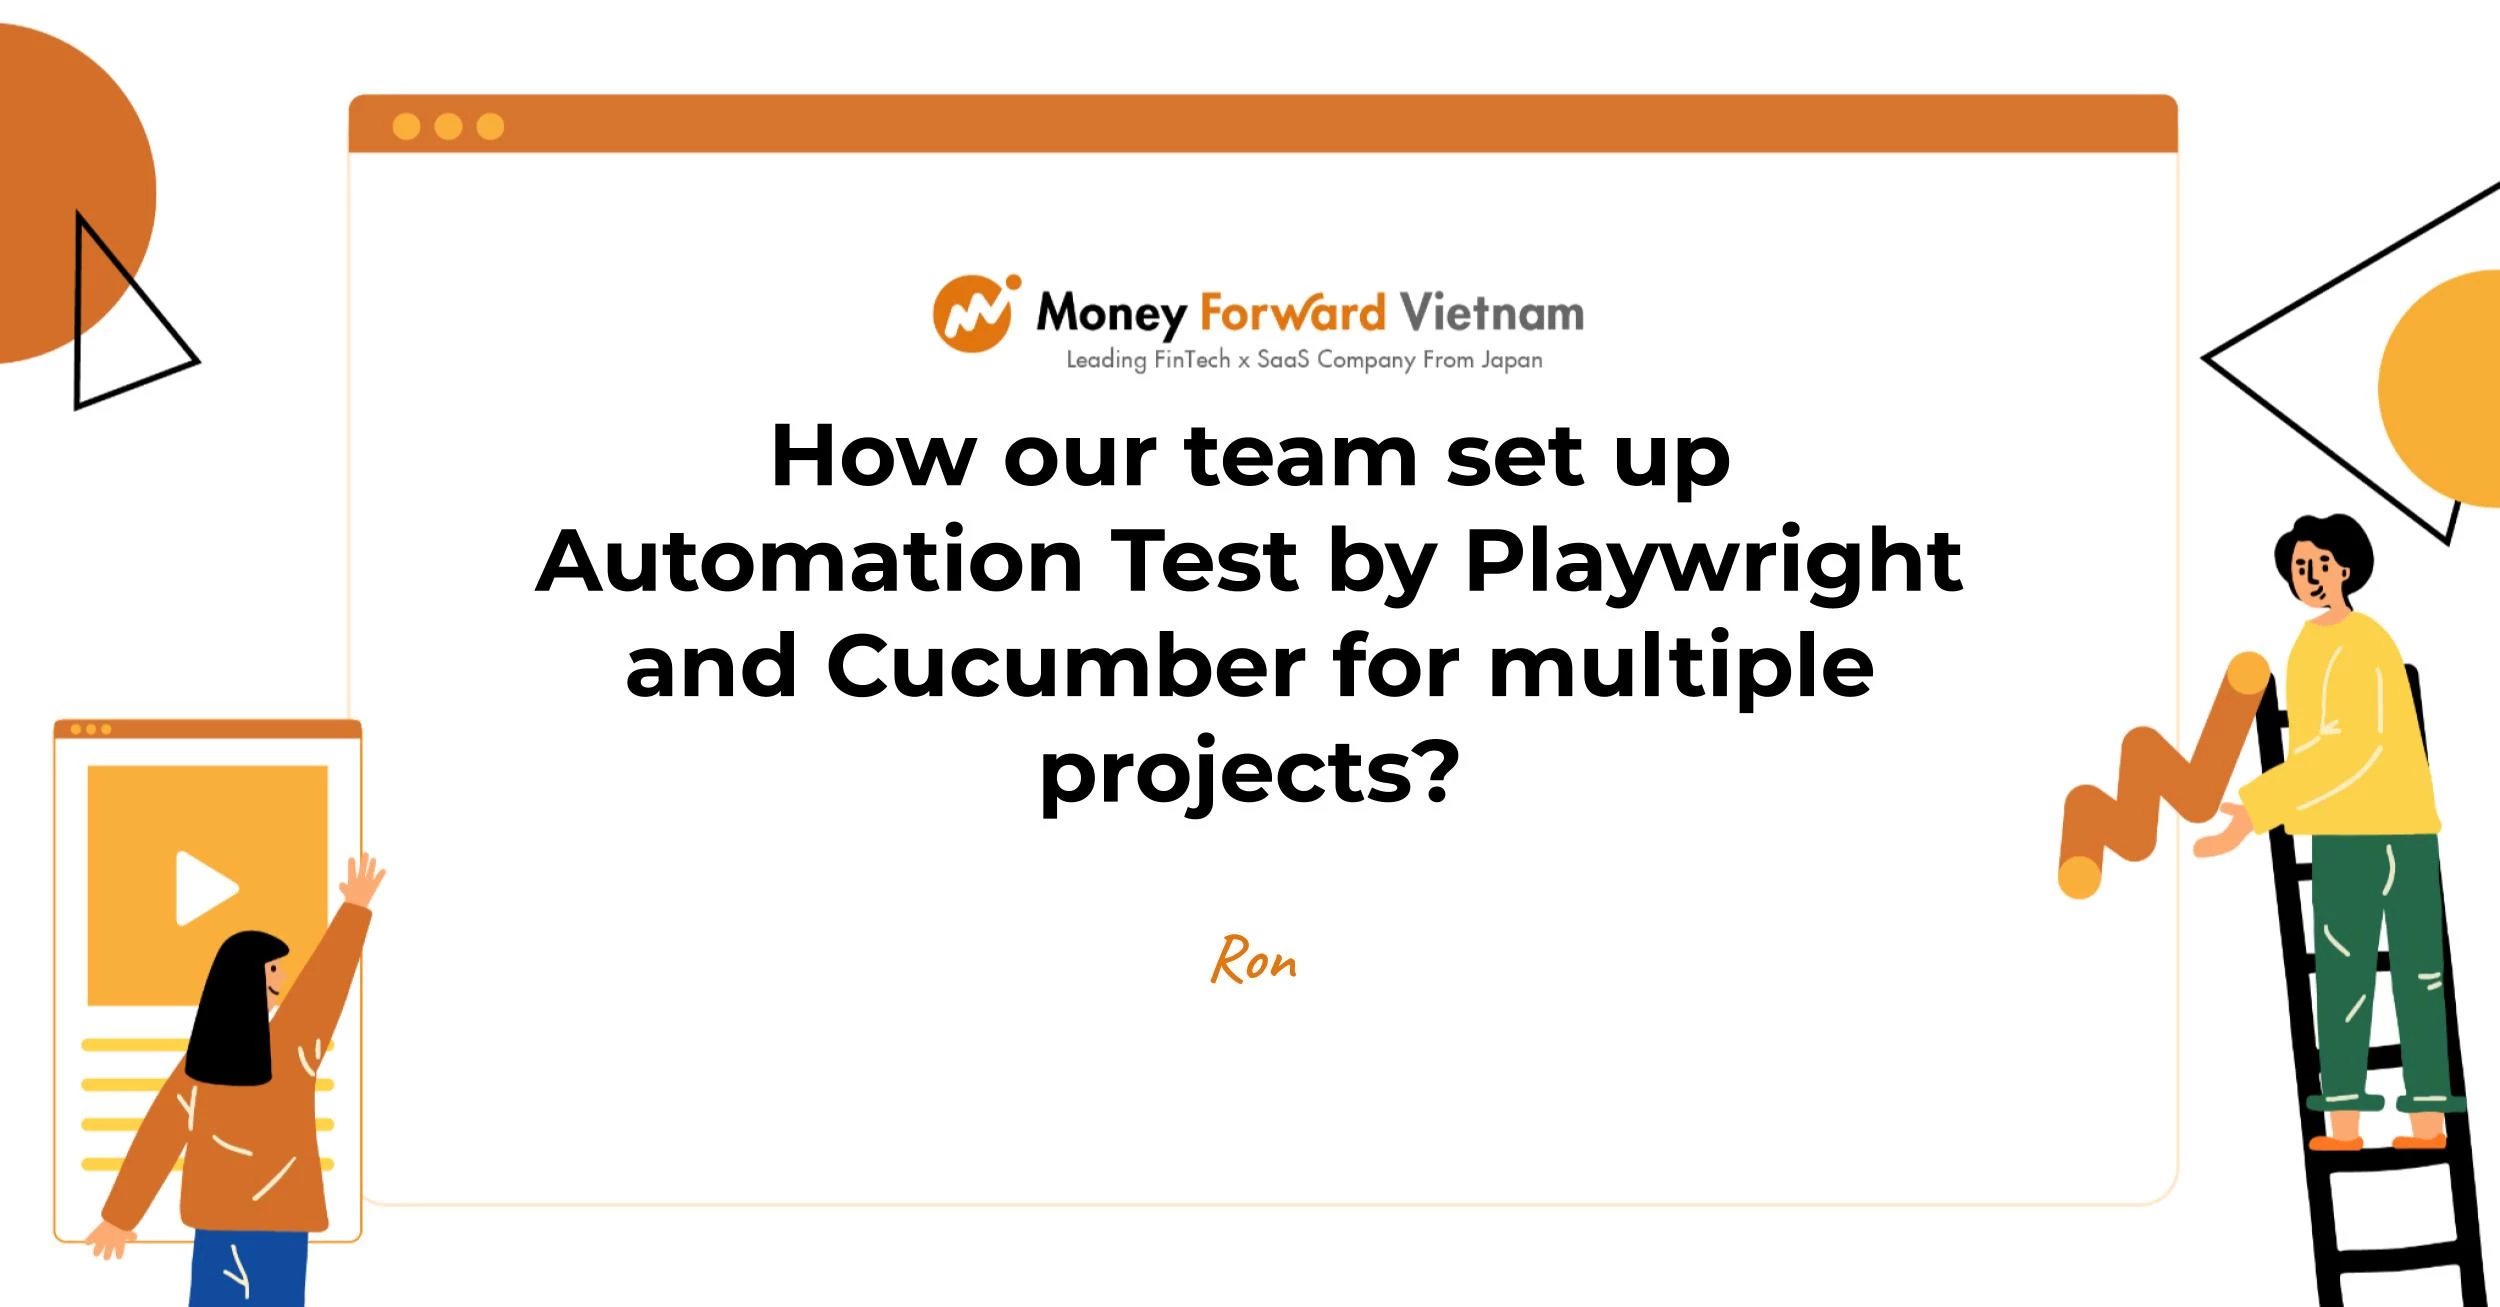 How our team set up Automation Test by Playwright and Cucumber for multiple projects?